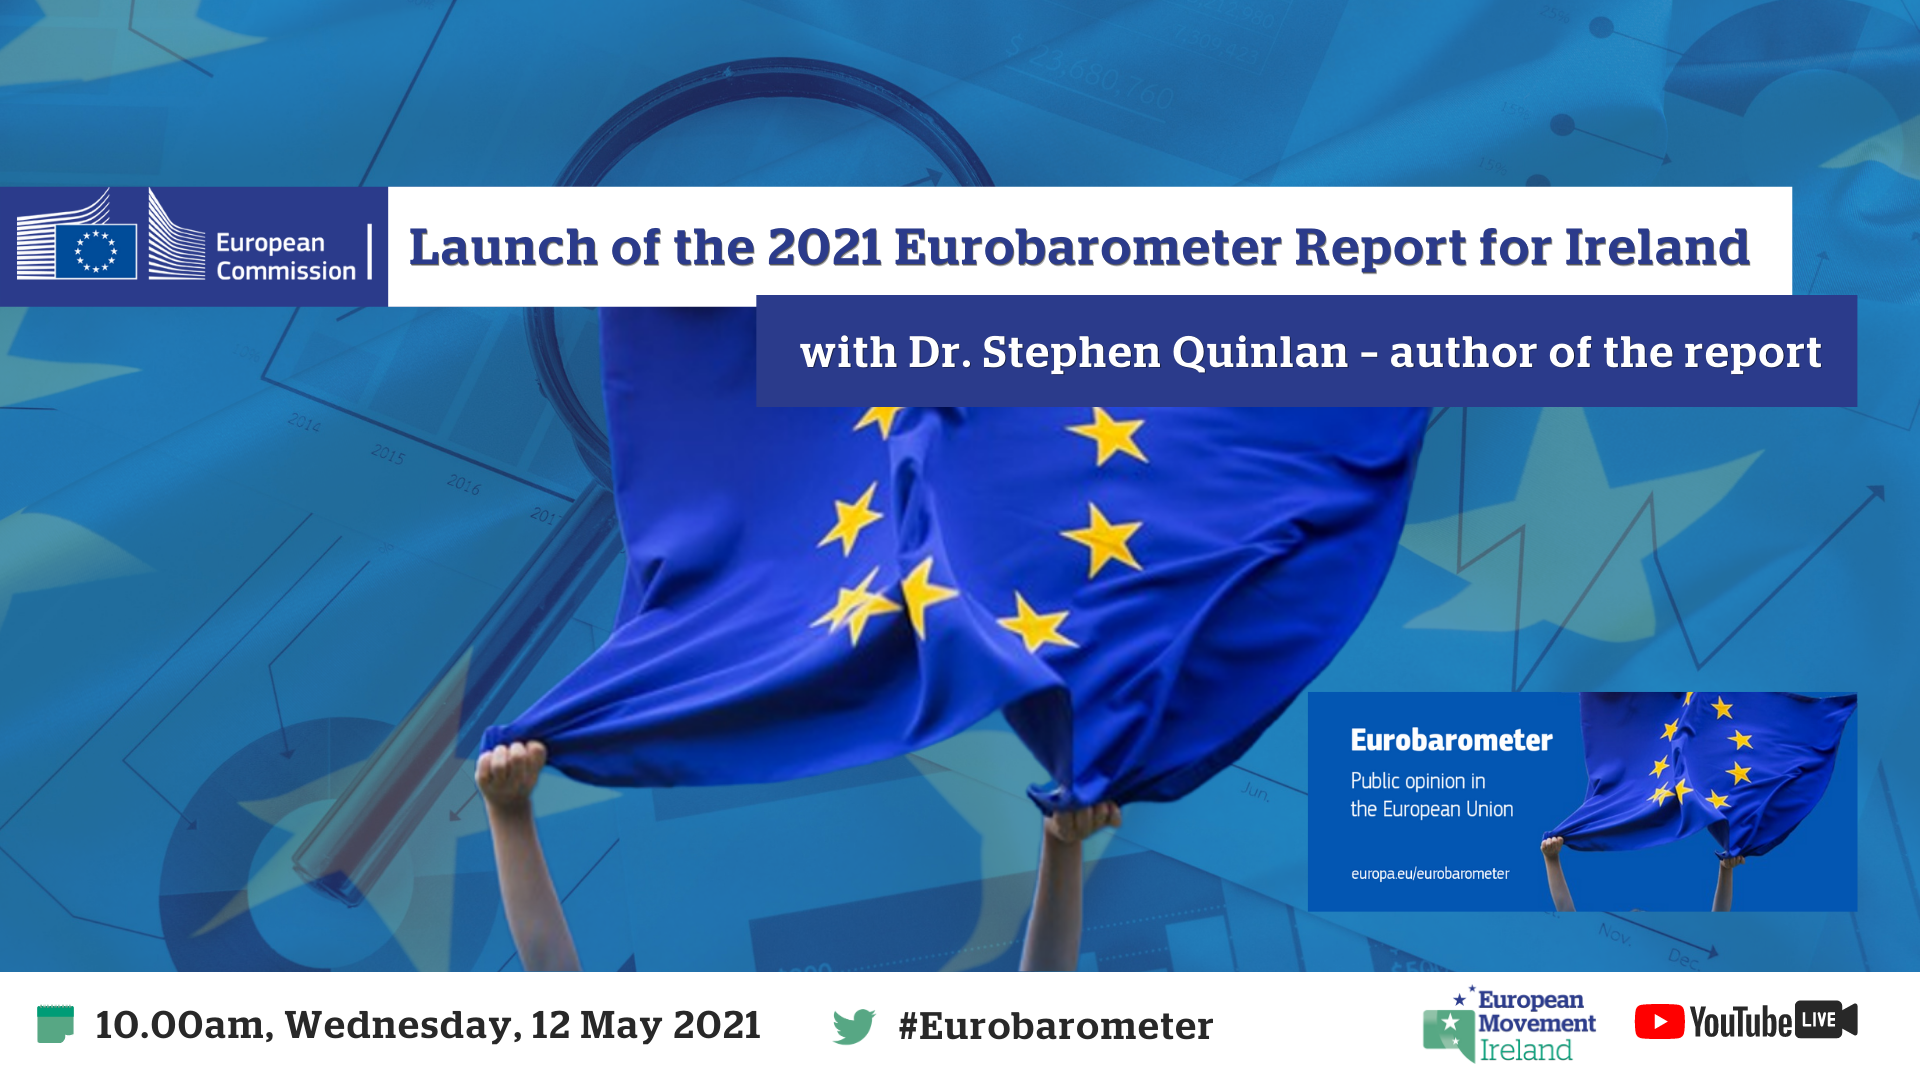 Image of hands holding the European flag with the text: Launch of the 2021 Eurobarometer report for Ireland